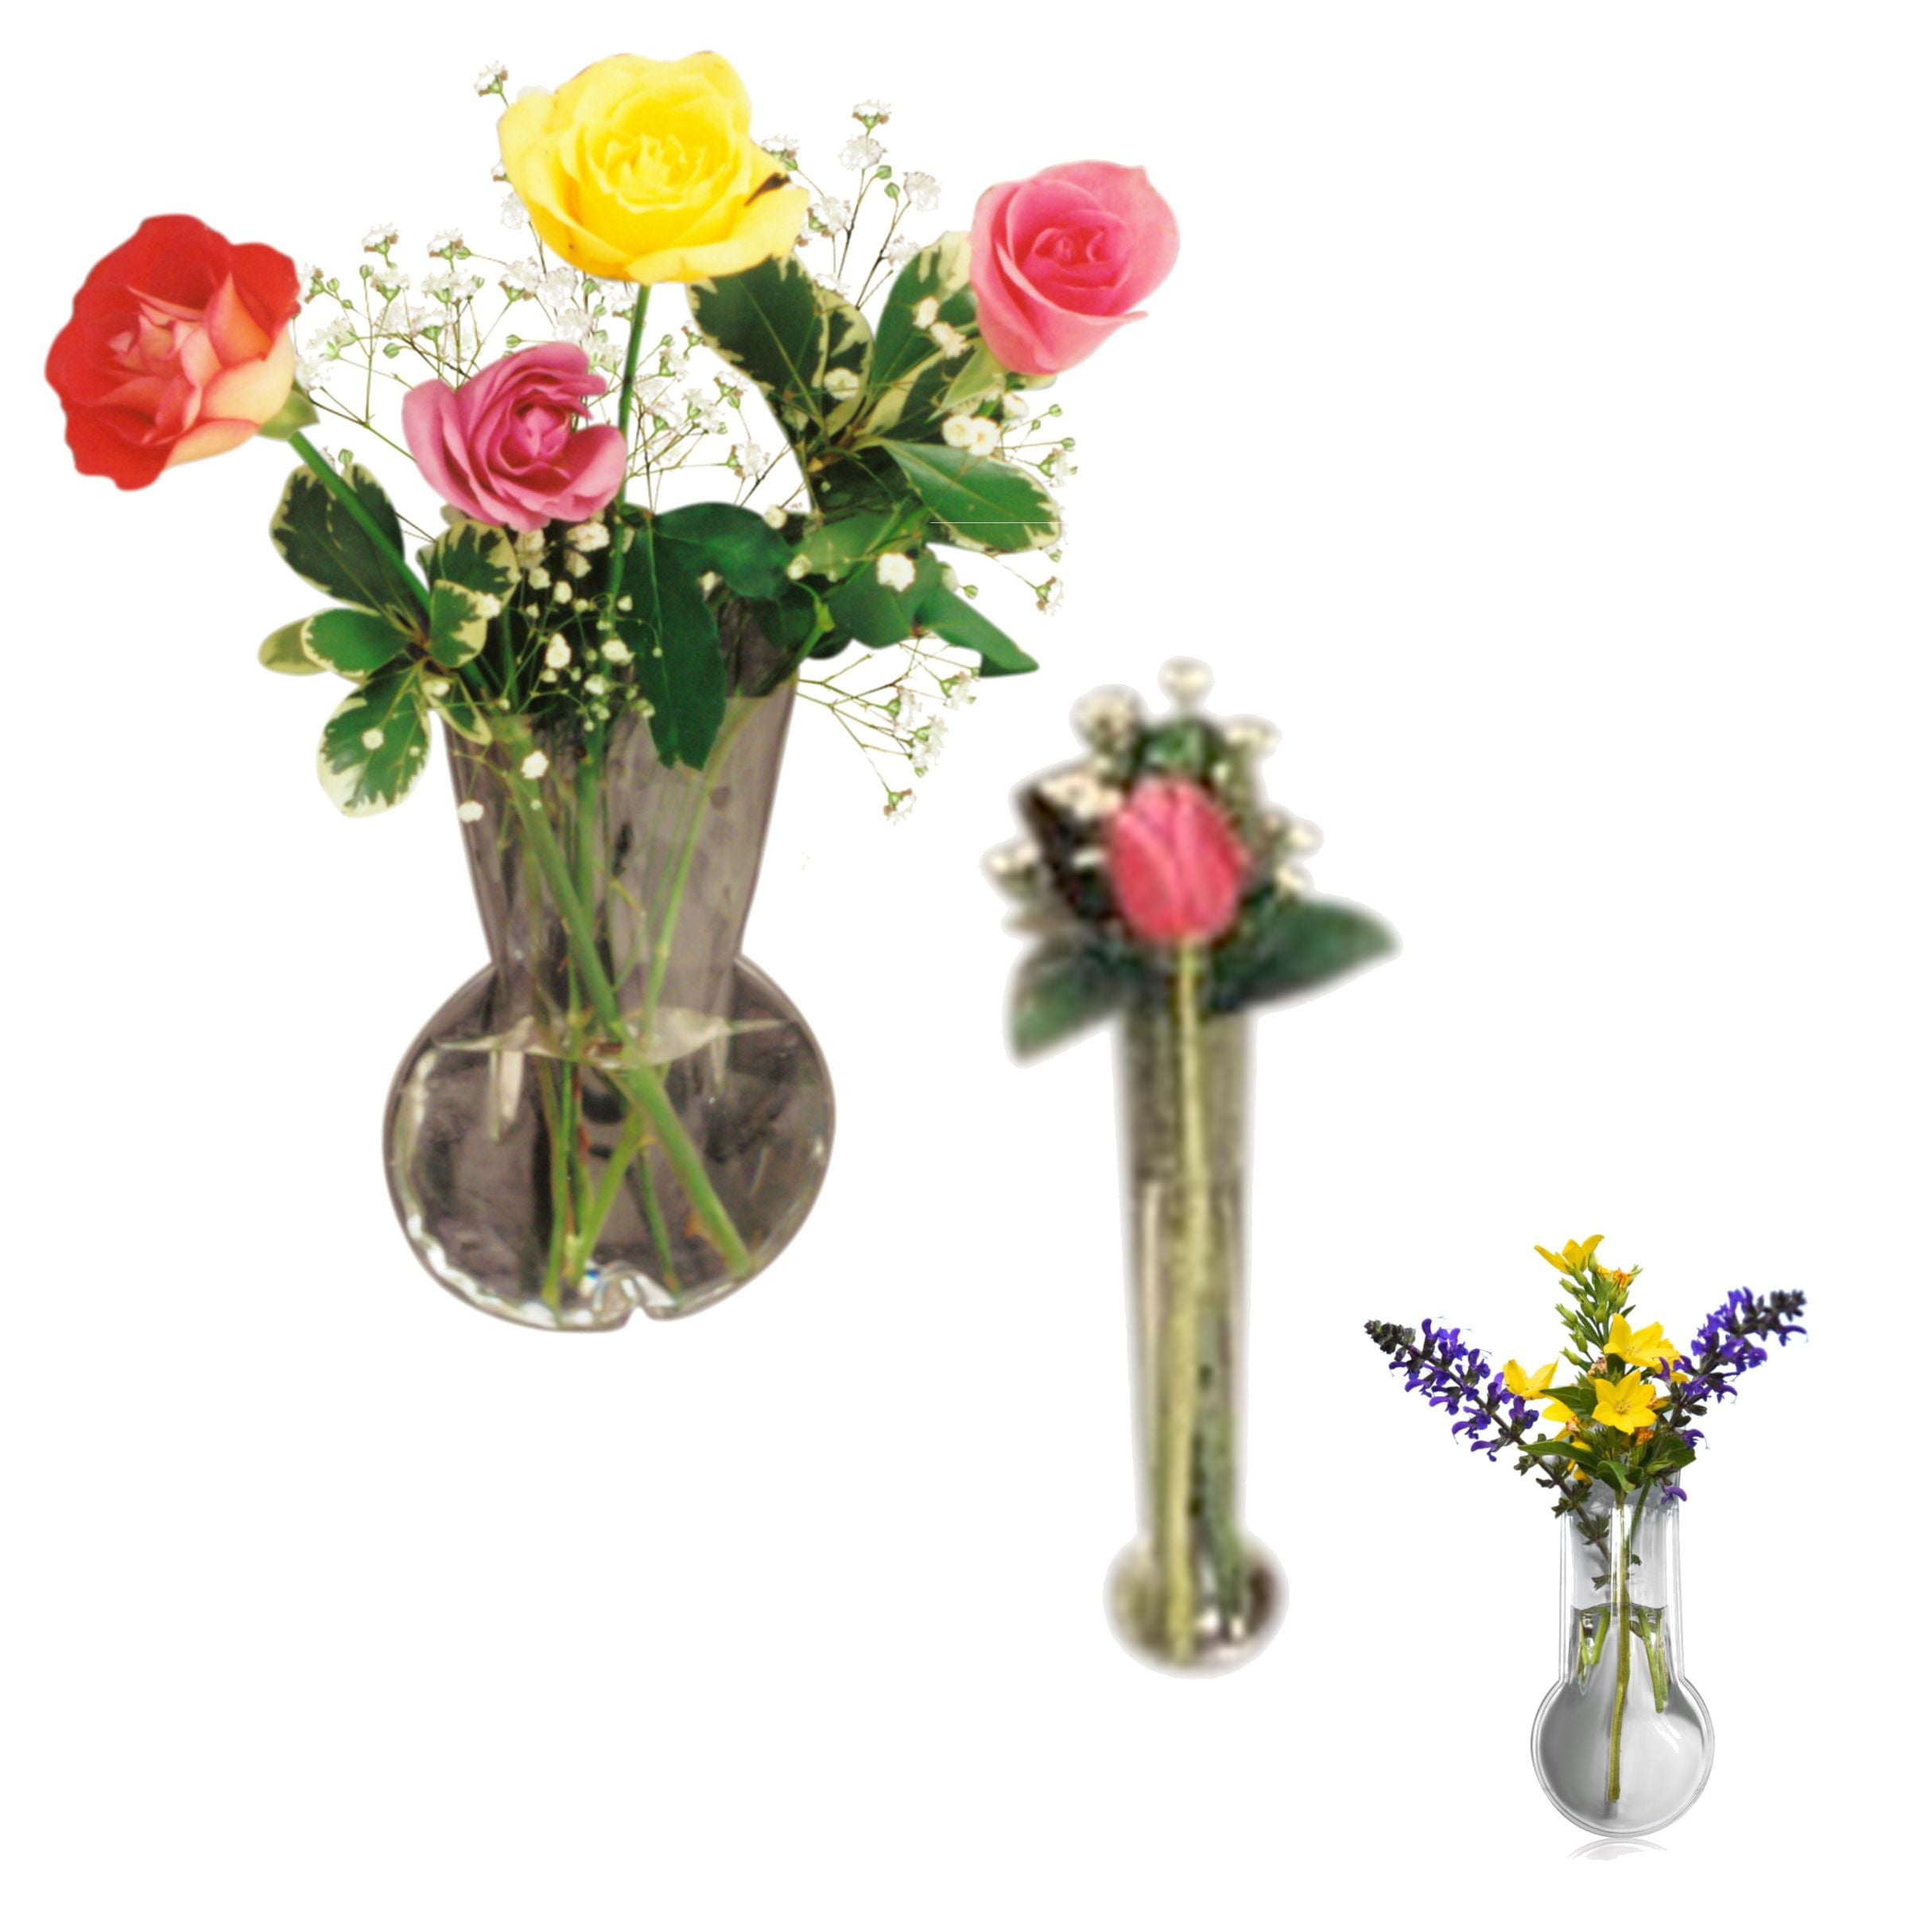 Window Vase Single Bulb Style Made of Flexible Vinyl Fill with Water and Stems 